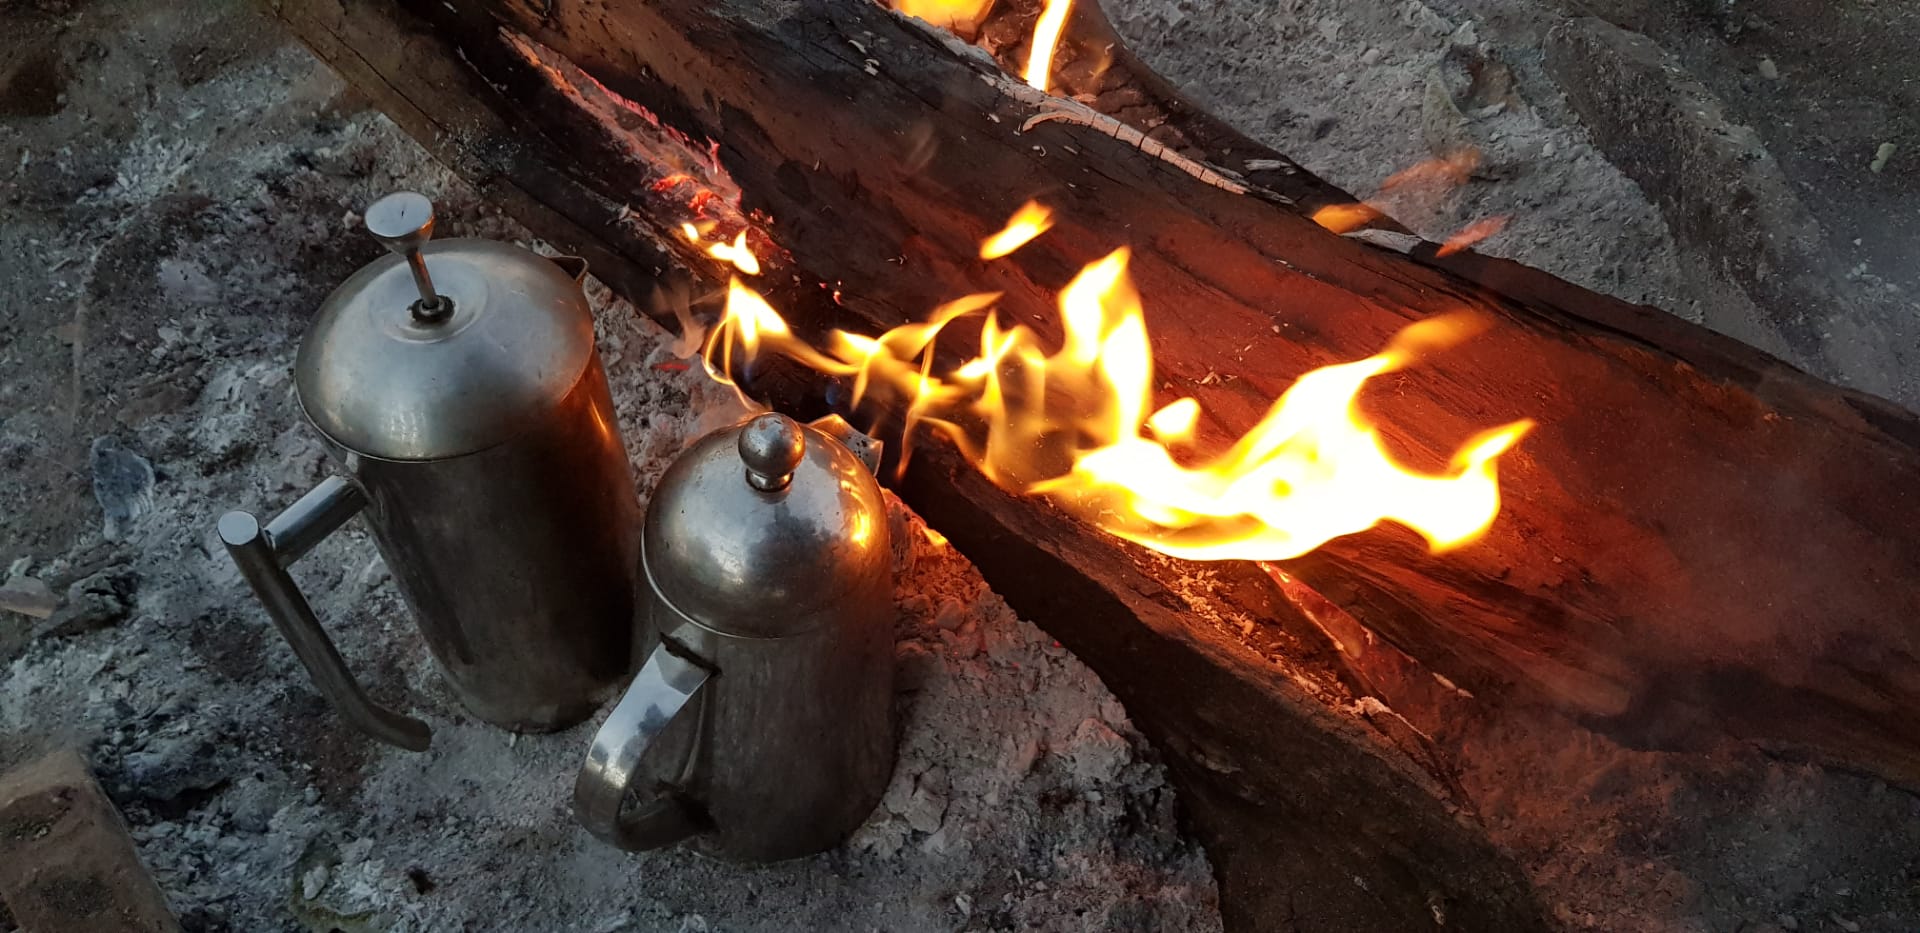 Early morning coffee on a rustic campfire